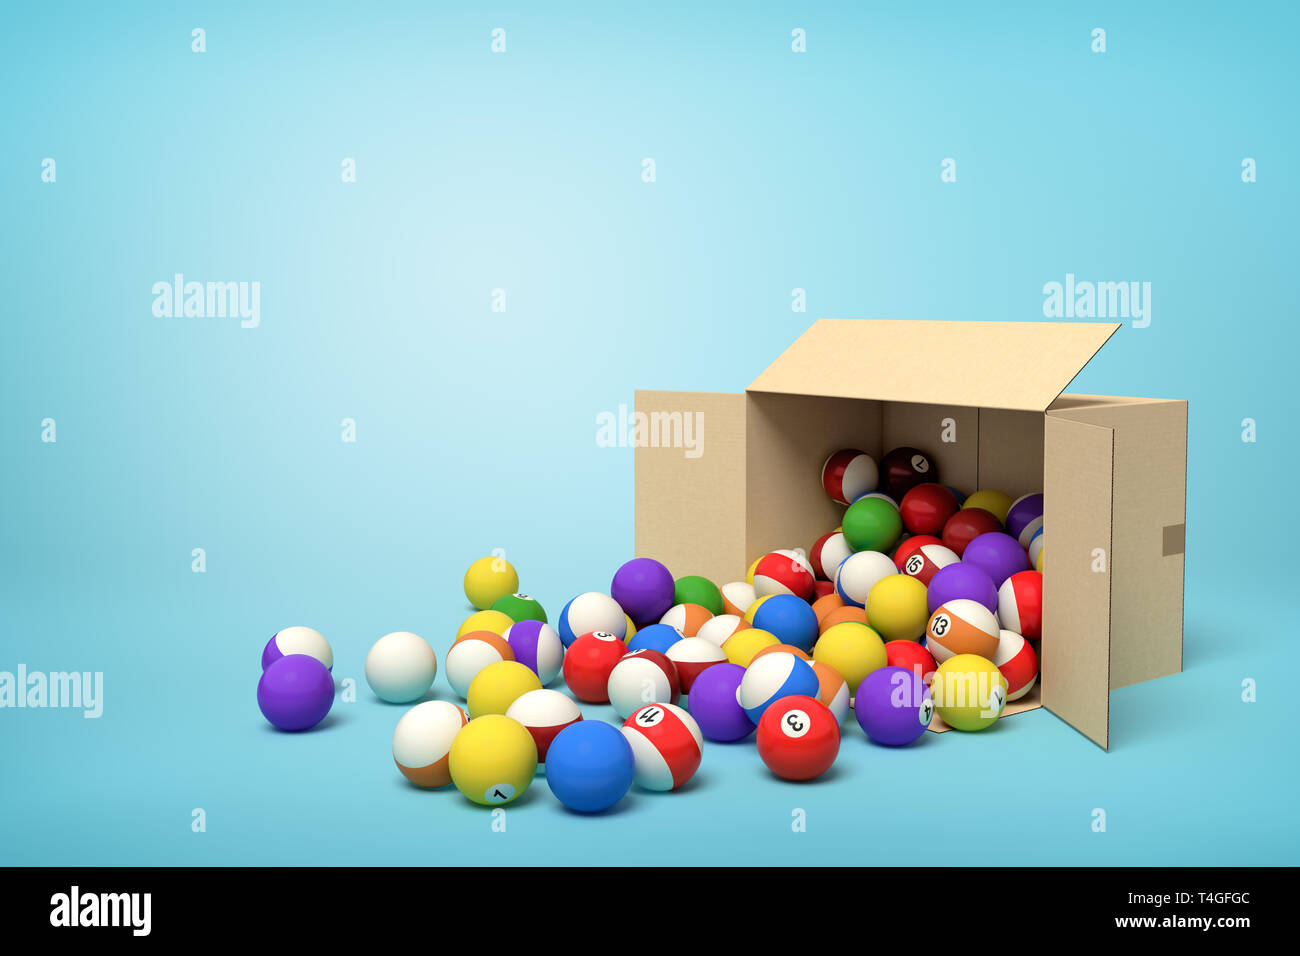 3d rendering of cardboard box lying sidelong with colorful snooker balls inside and in front of it on light-blue background with copy space. Stock Photo